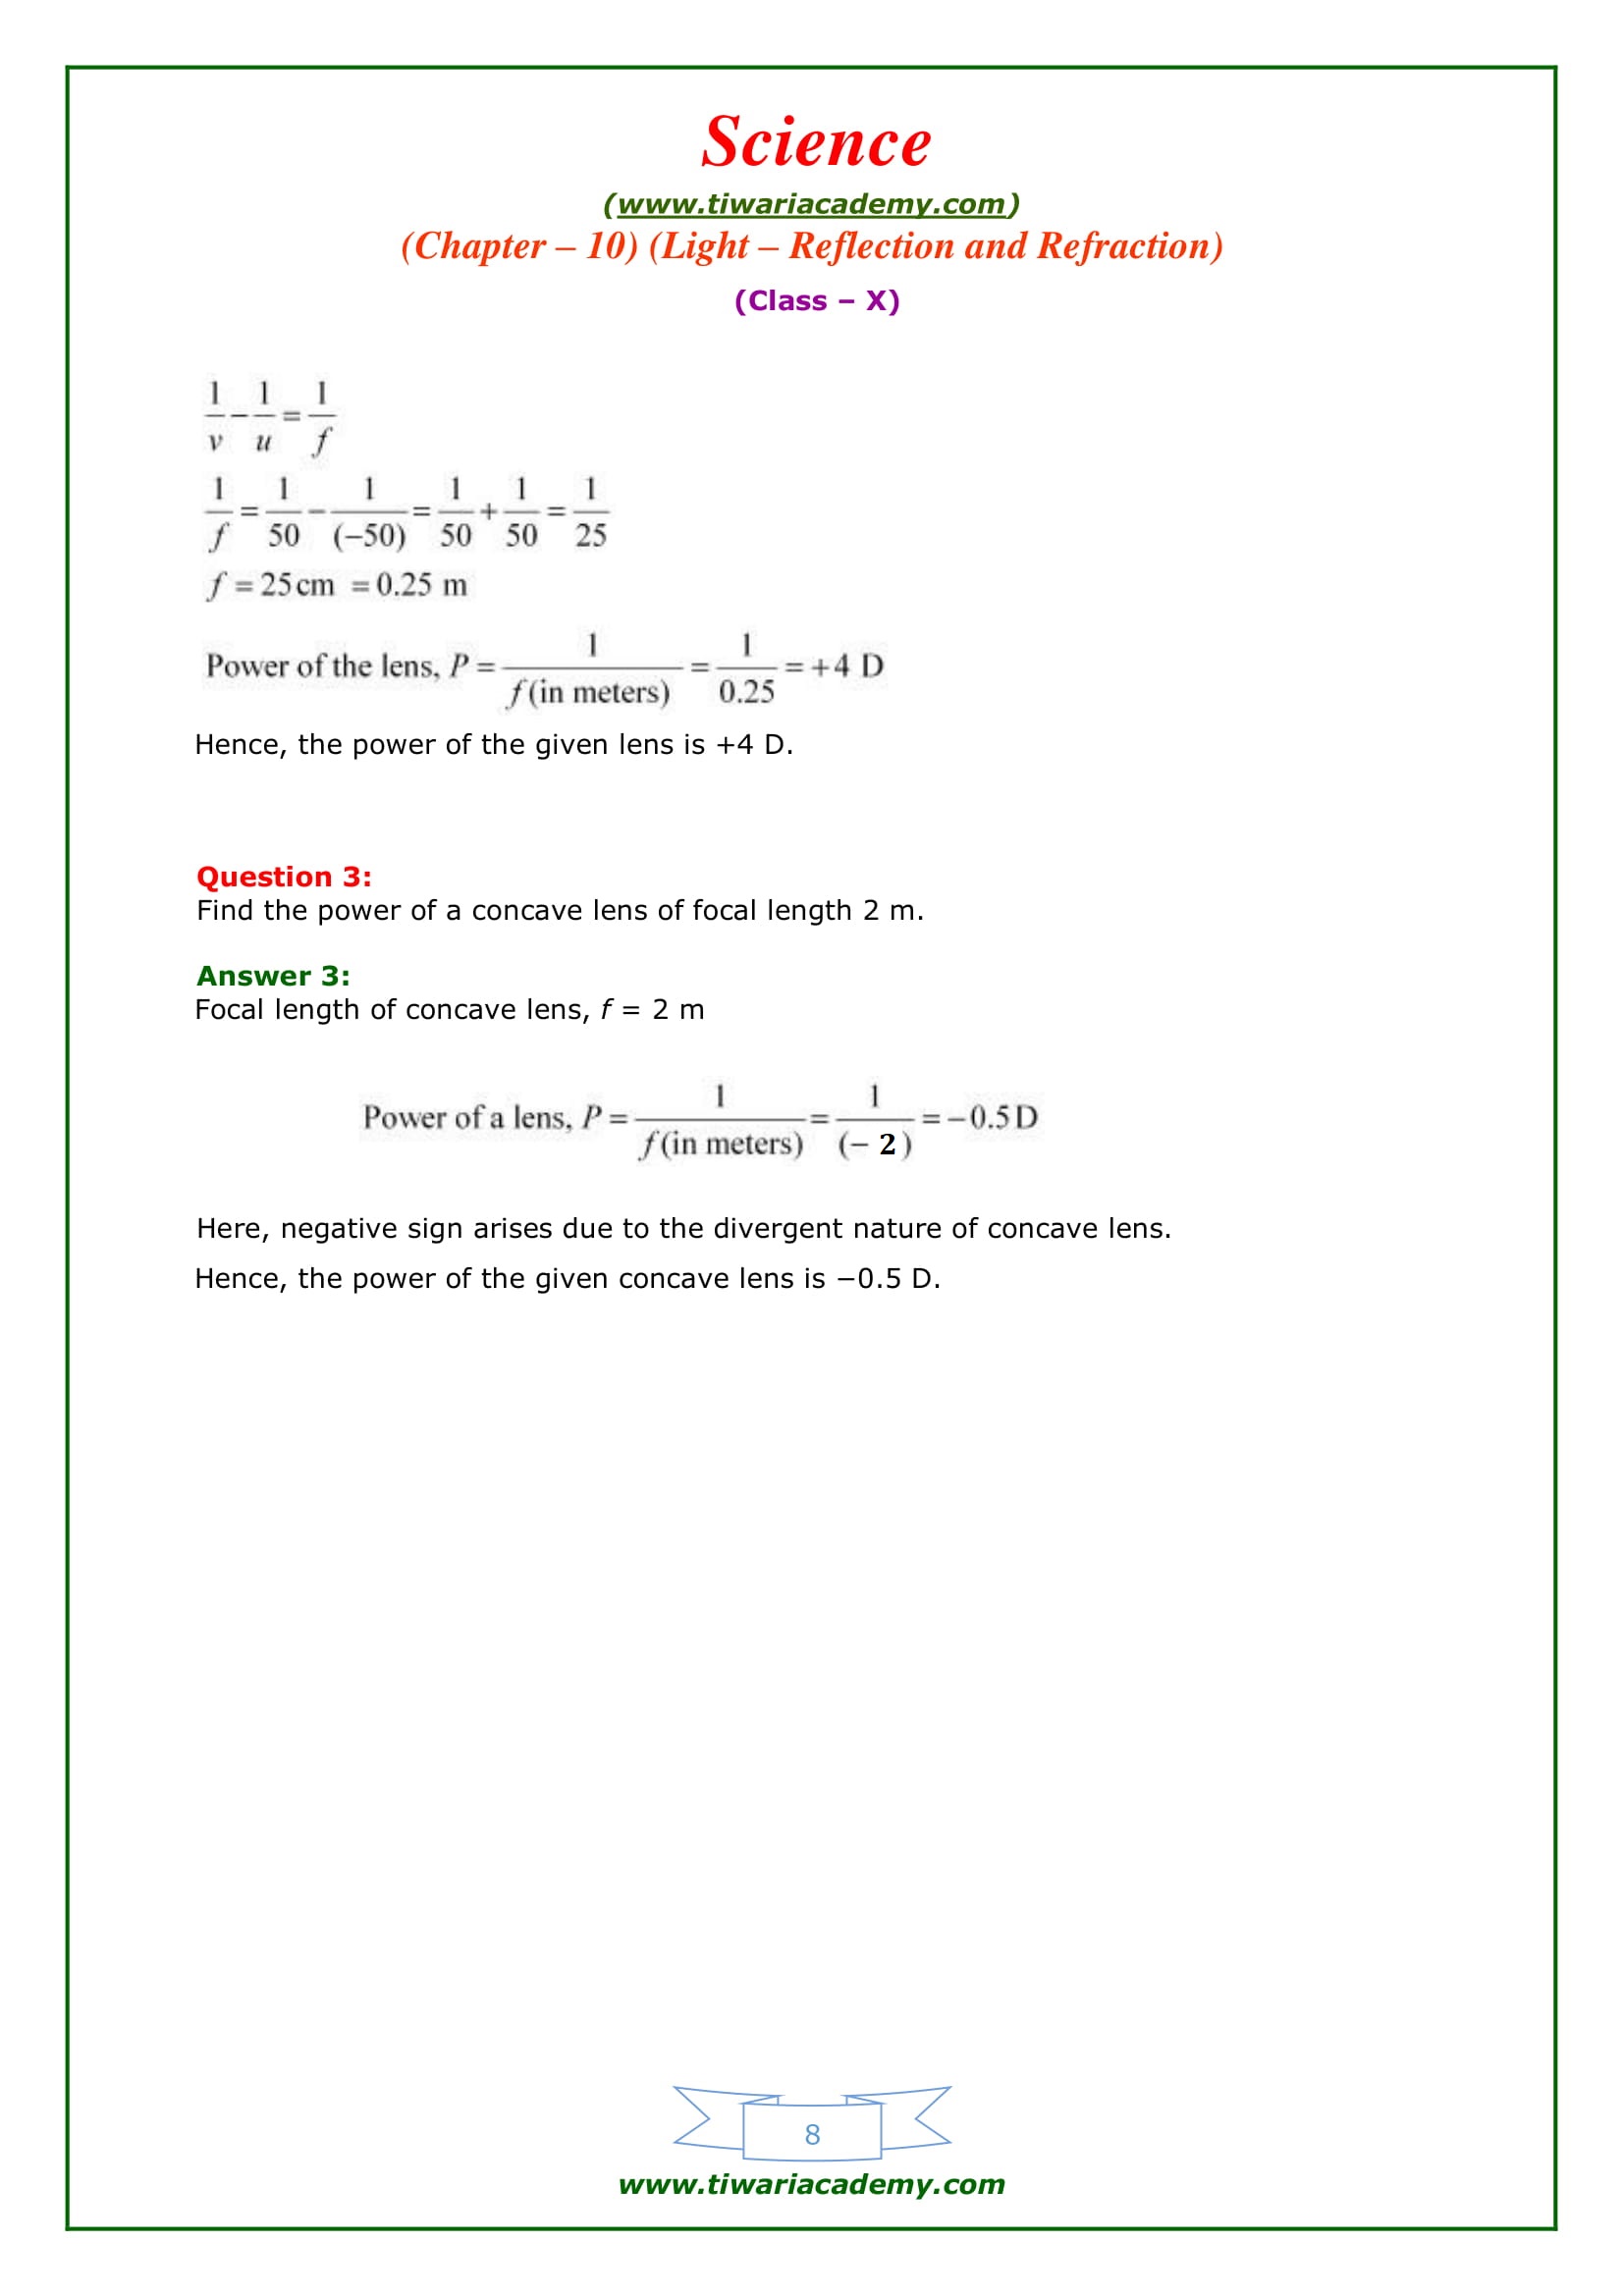 10th Science Page 184 Question number 3 answers